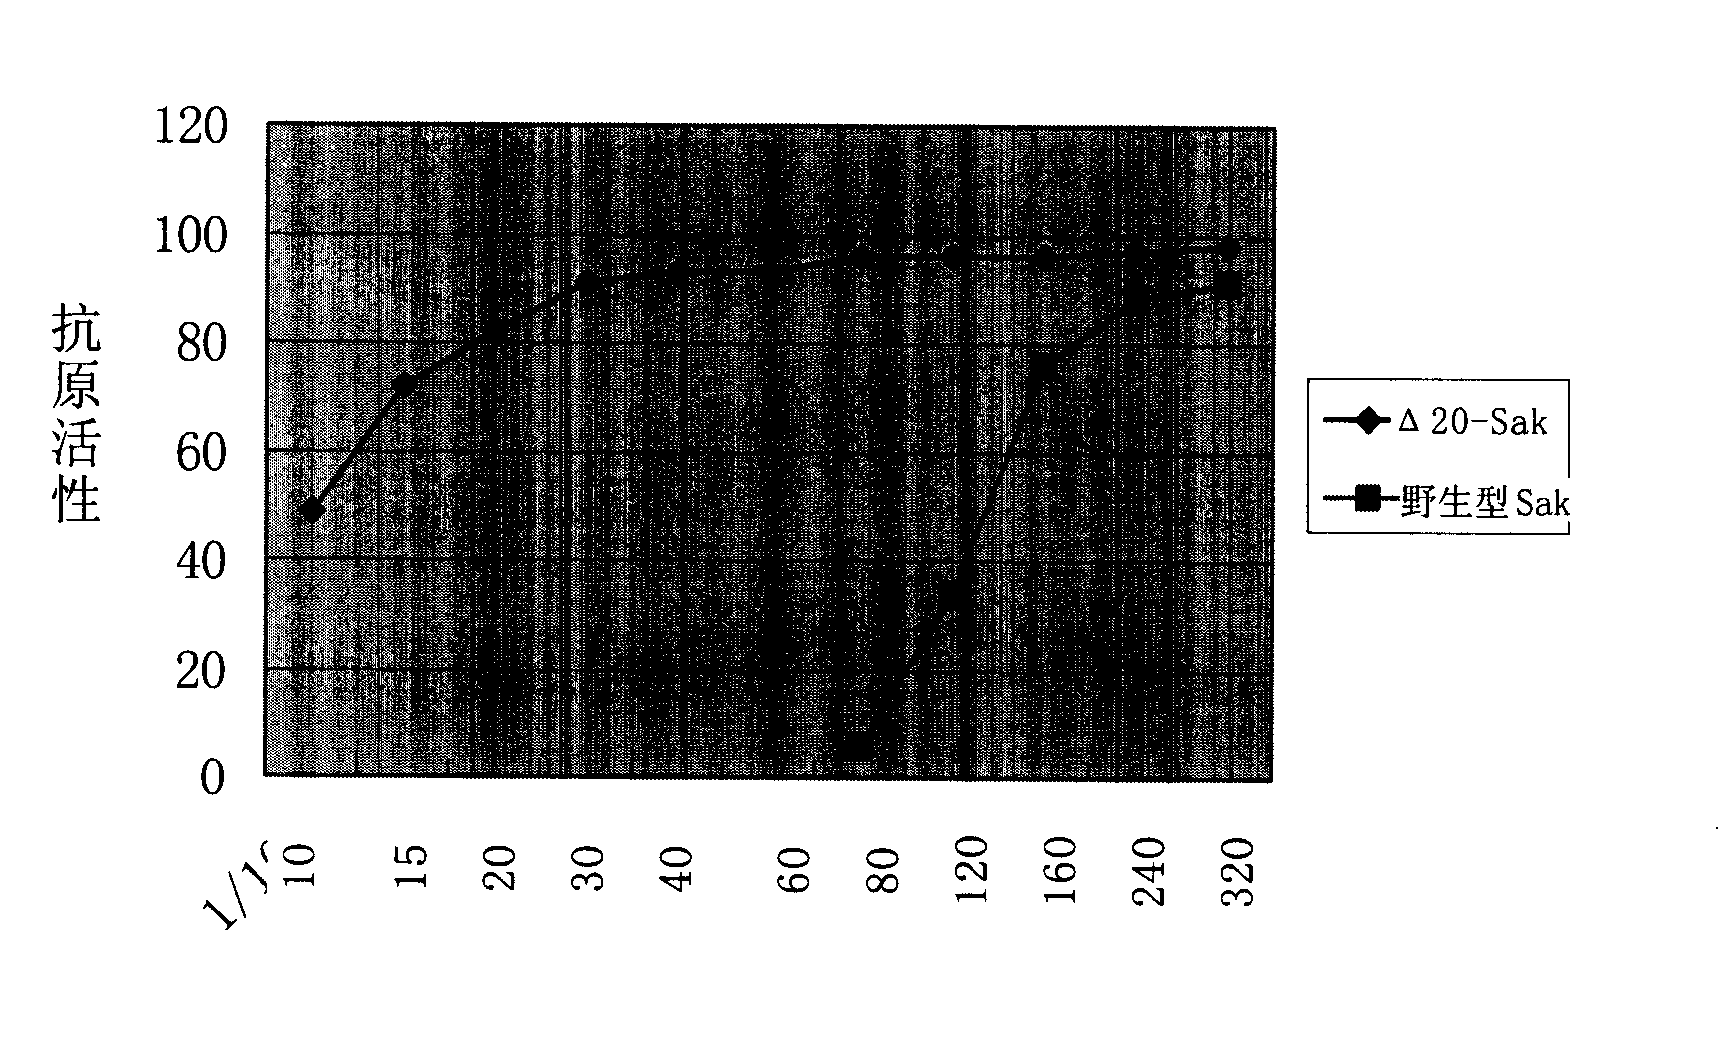 Staphylokinase intramuscular injection and method for preparing the same